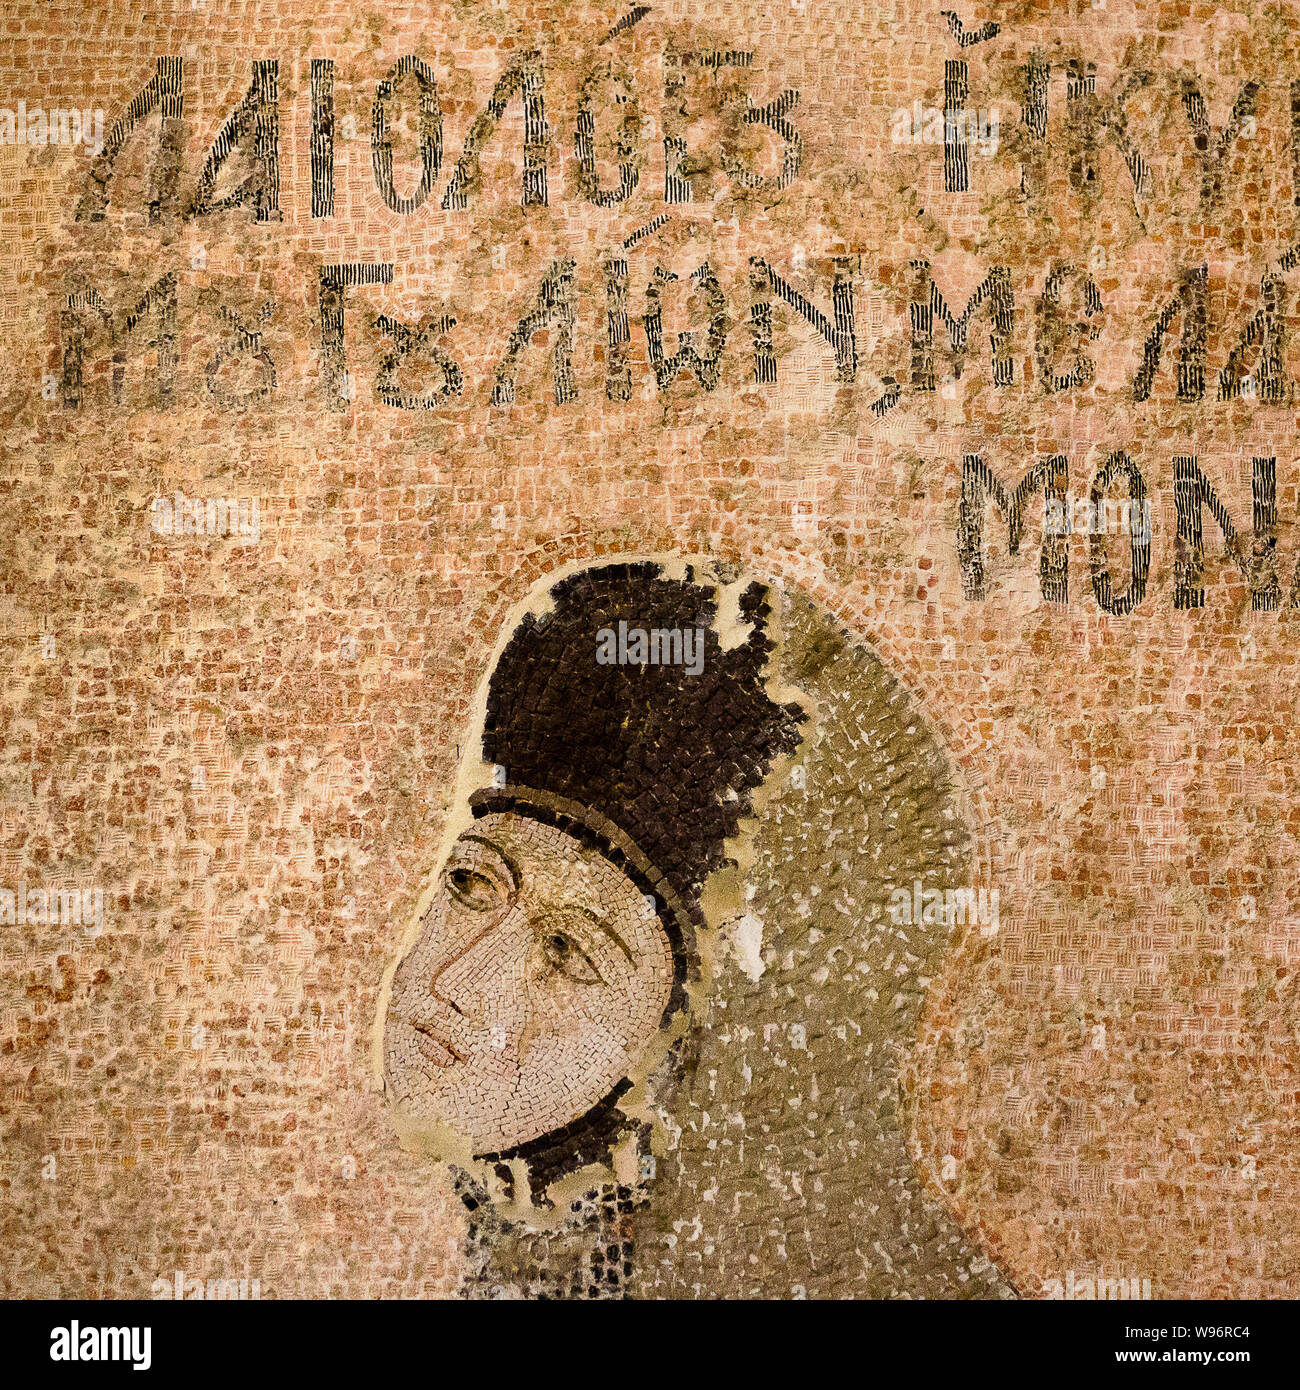 Saint Mary of the Mongols, Mosaic in Chora Church, Istanbul, Oct 11, 2013, Princess Mary Palaeologus. She was sent to Karakoum in 1265 to marry the Mo Stock Photo